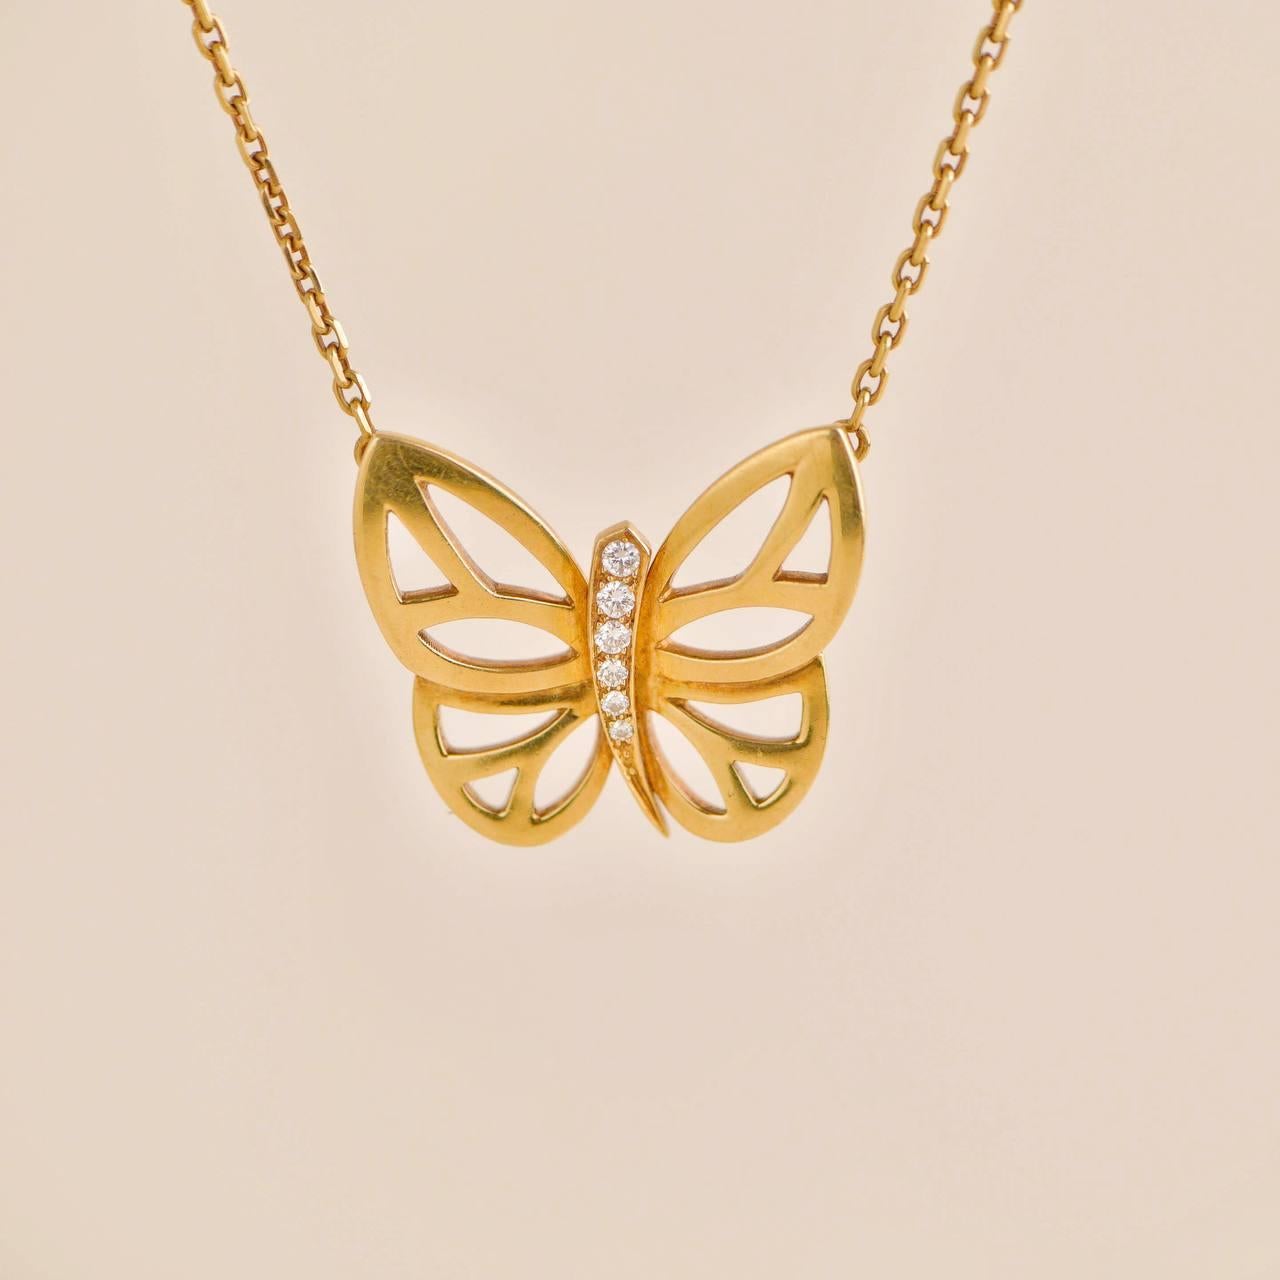 Brilliant Cut Van Cleef & Arpels 18K Yellow Gold Diamond Butterfly Pendant Necklace For Sale